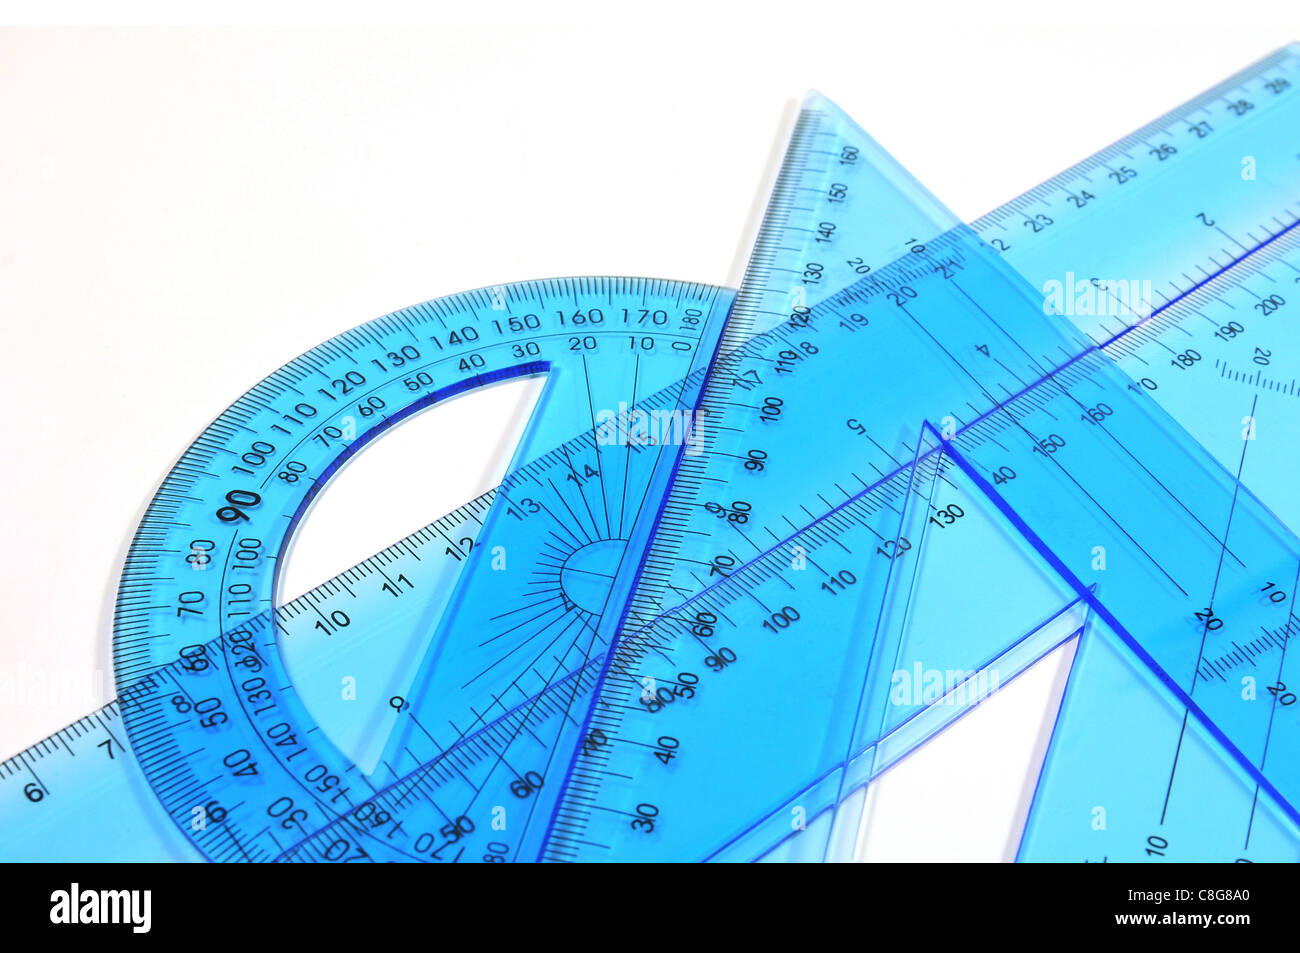 Architecture tools - Set of ruler, triangle and protractor on white  background Stock Photo - Alamy